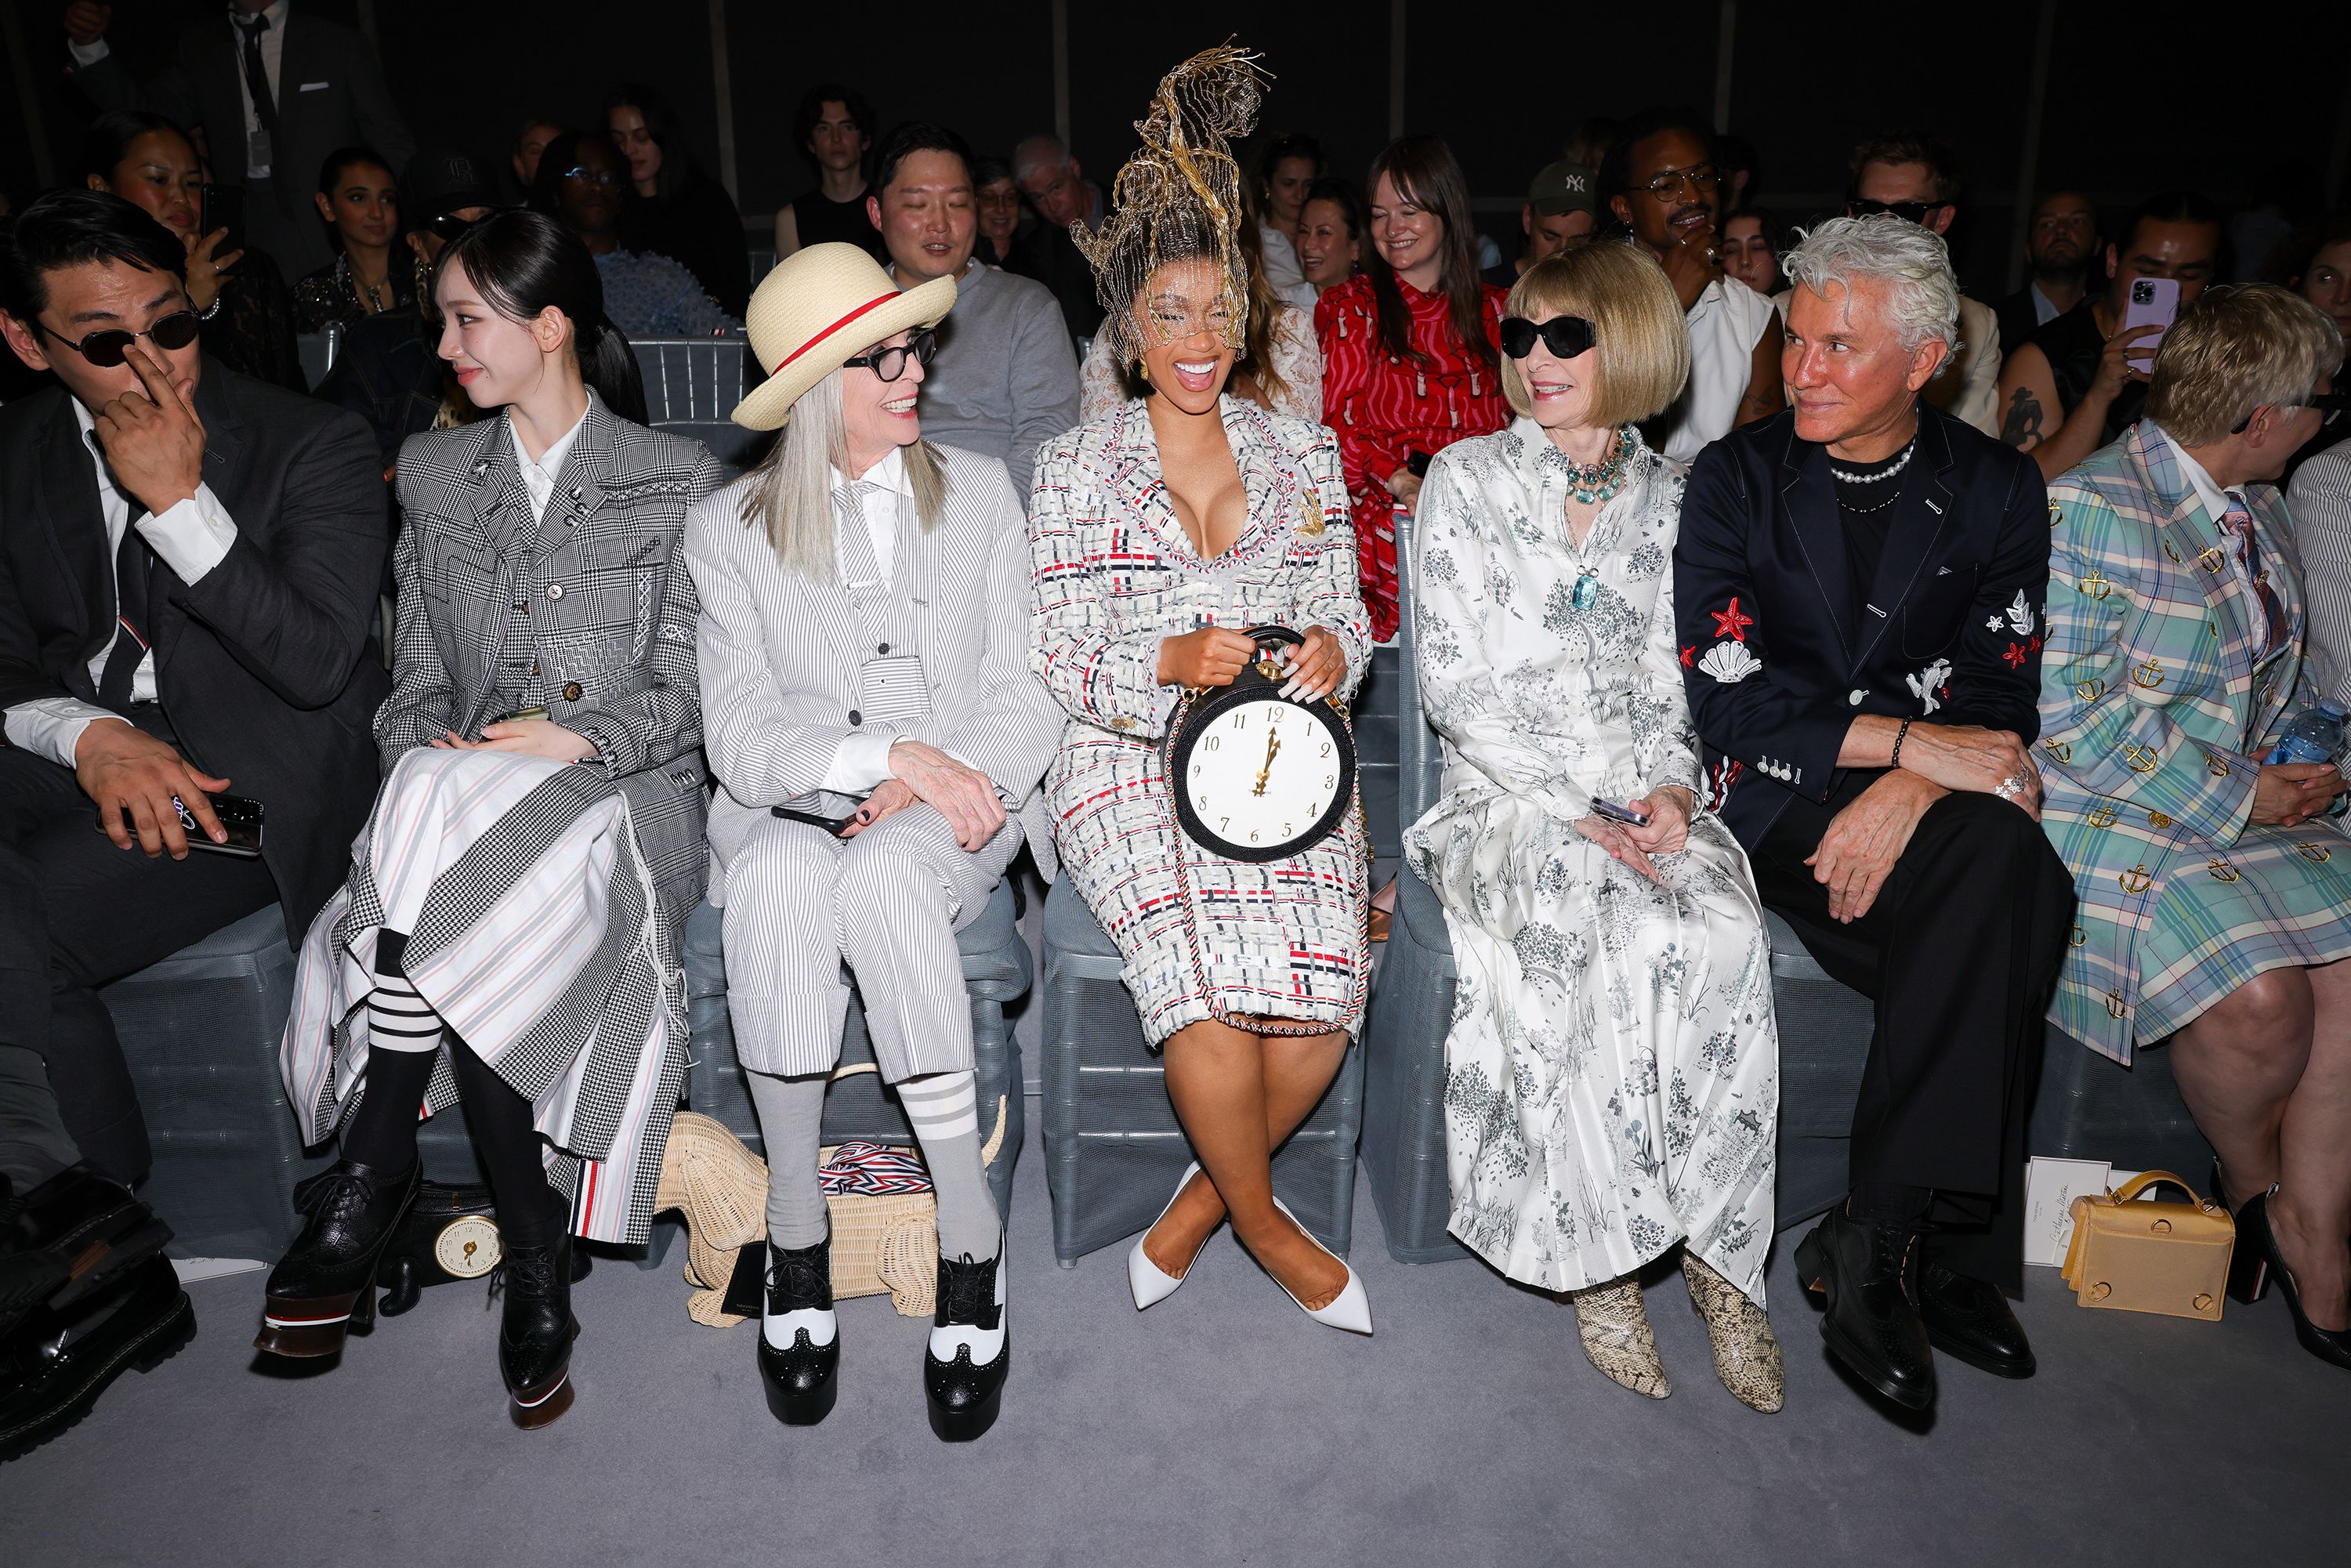 PARIS, FRANCE - JULY 03: (EDITORIAL USE ONLY - For Non-Editorial use please seek approval from Fashion House) Karina,Diane Keaton,Cardi B,Anna Wintour and  Baz Luhrmann attends the Thom Browne Haute Couture Fall/Winter 2023/2024 show as part of Paris Fashion Week  on July 03, 2023 in Paris, France. (Photo by Pierre Suu/Getty Images)